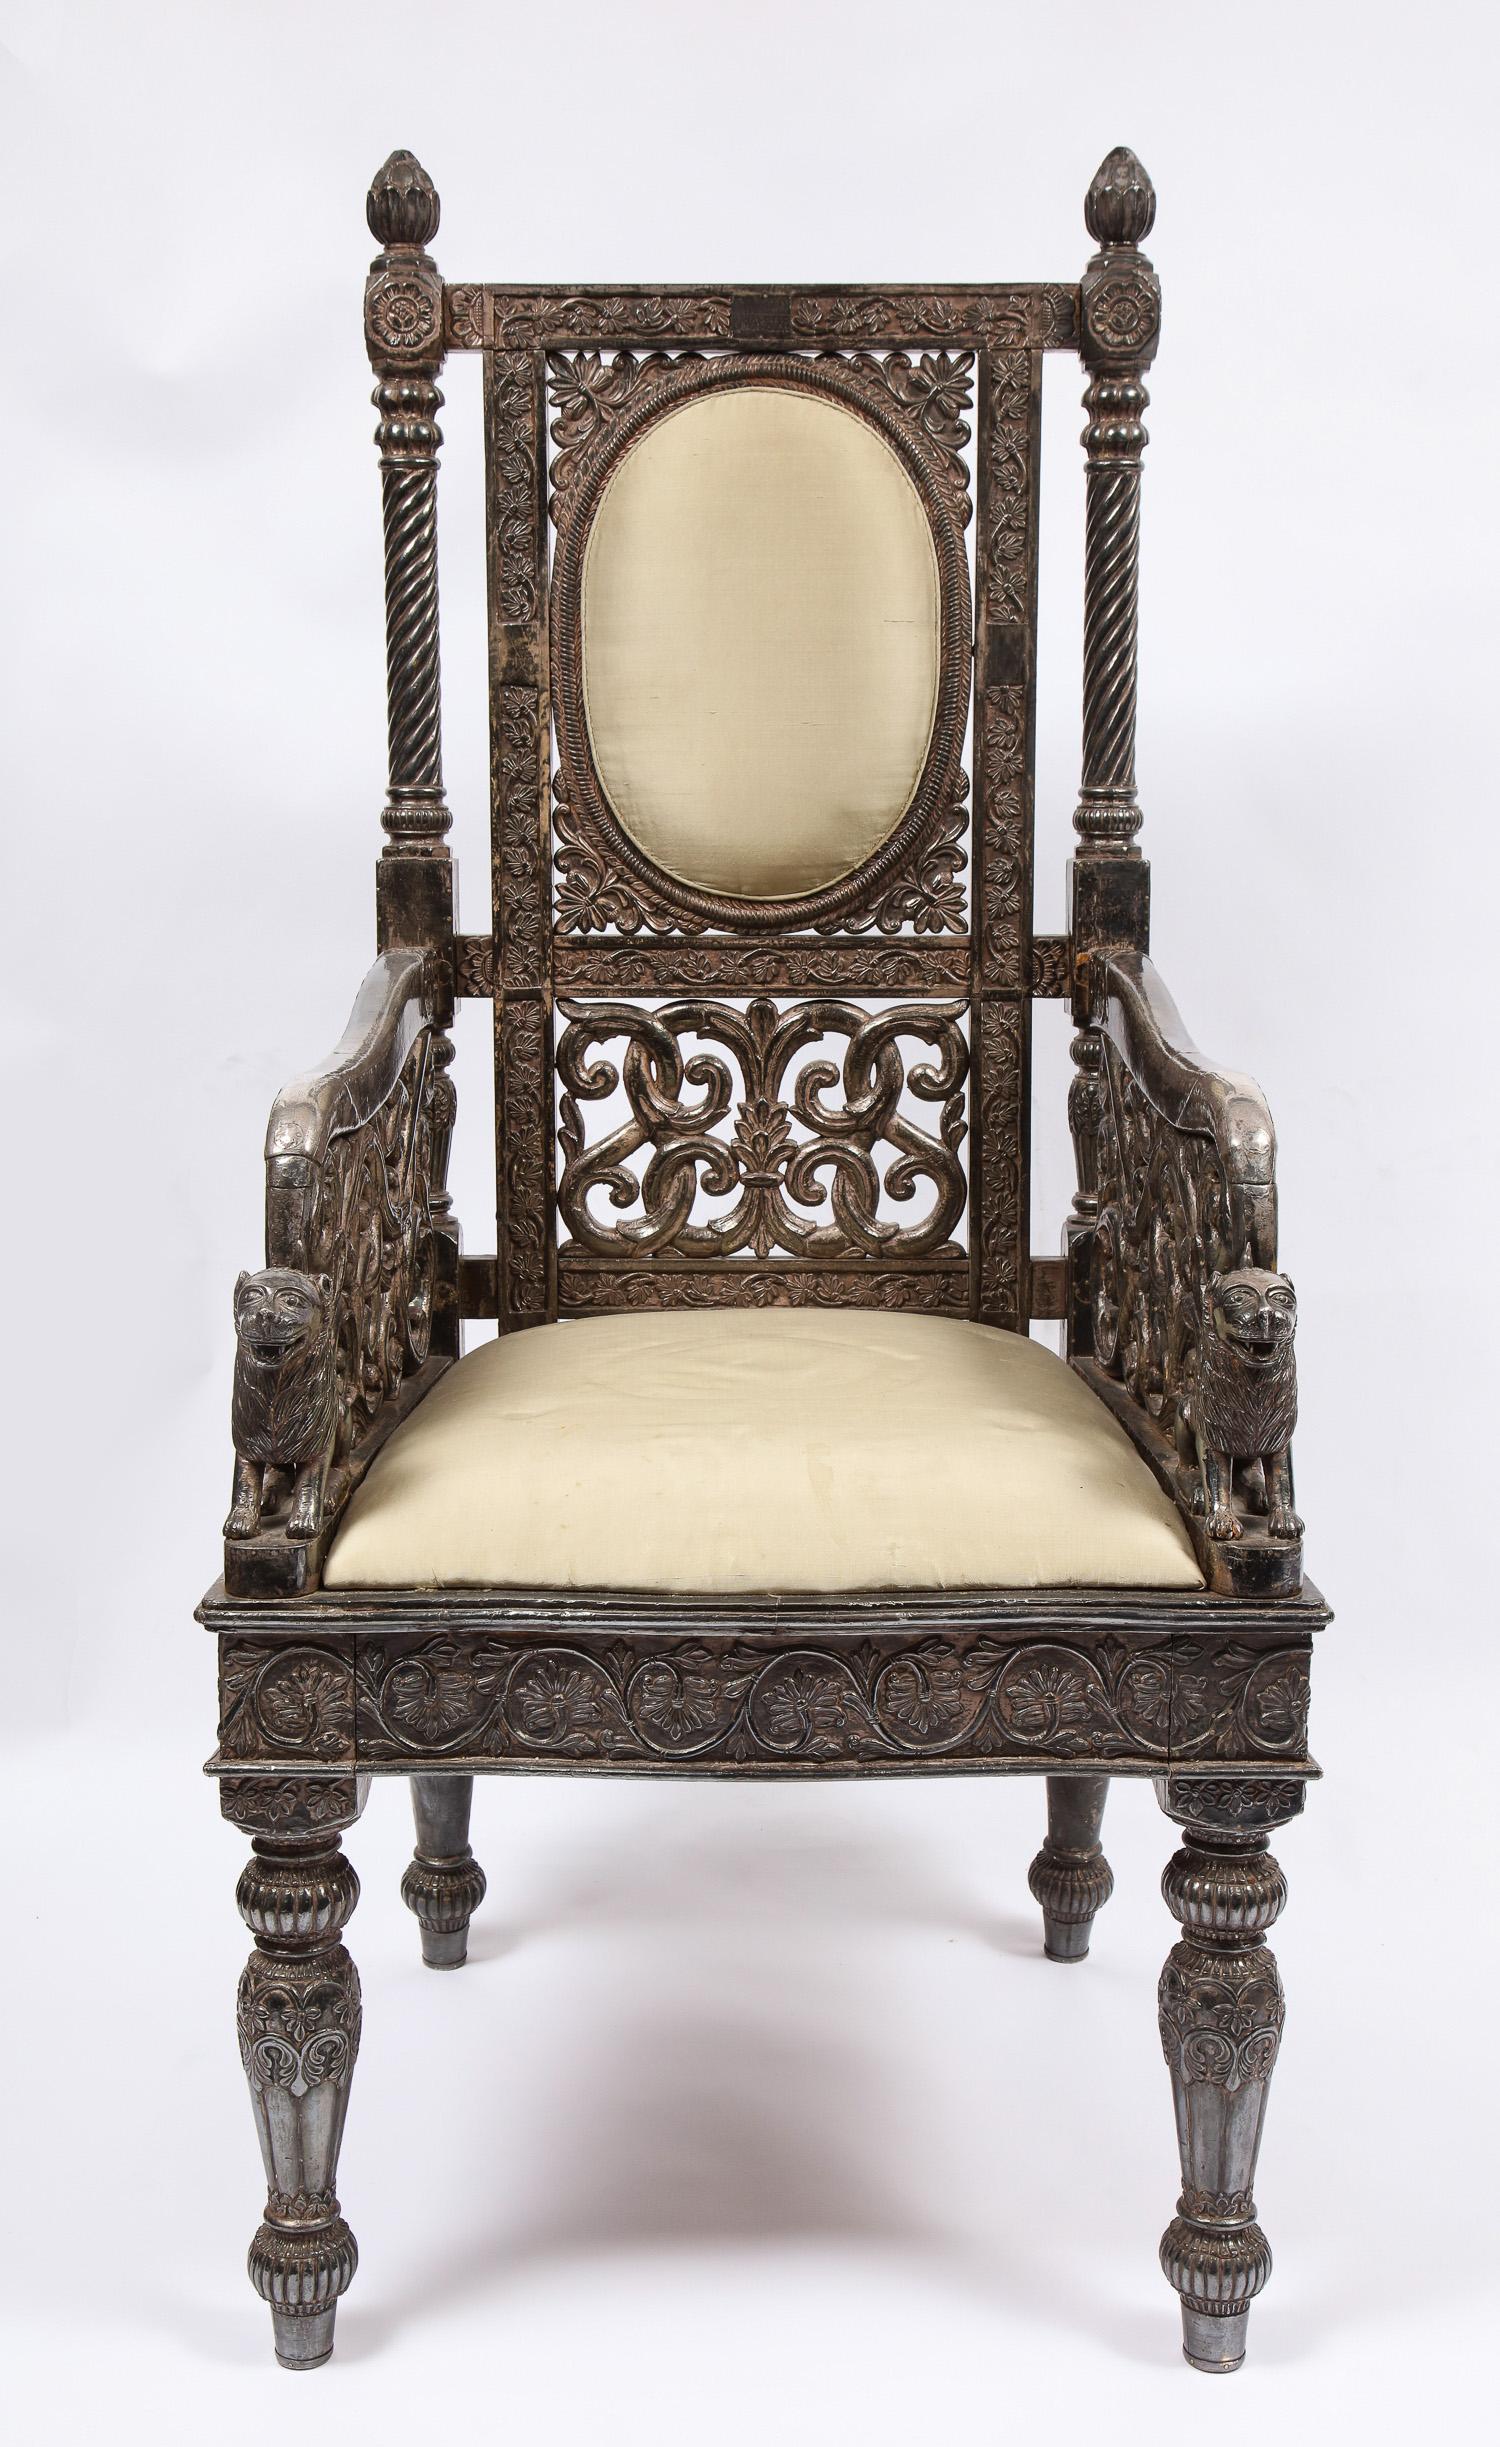 Indian Mogul Style Silver-Clad Gilded Ceremonial Throne Chair for the Maharajah For Sale 12